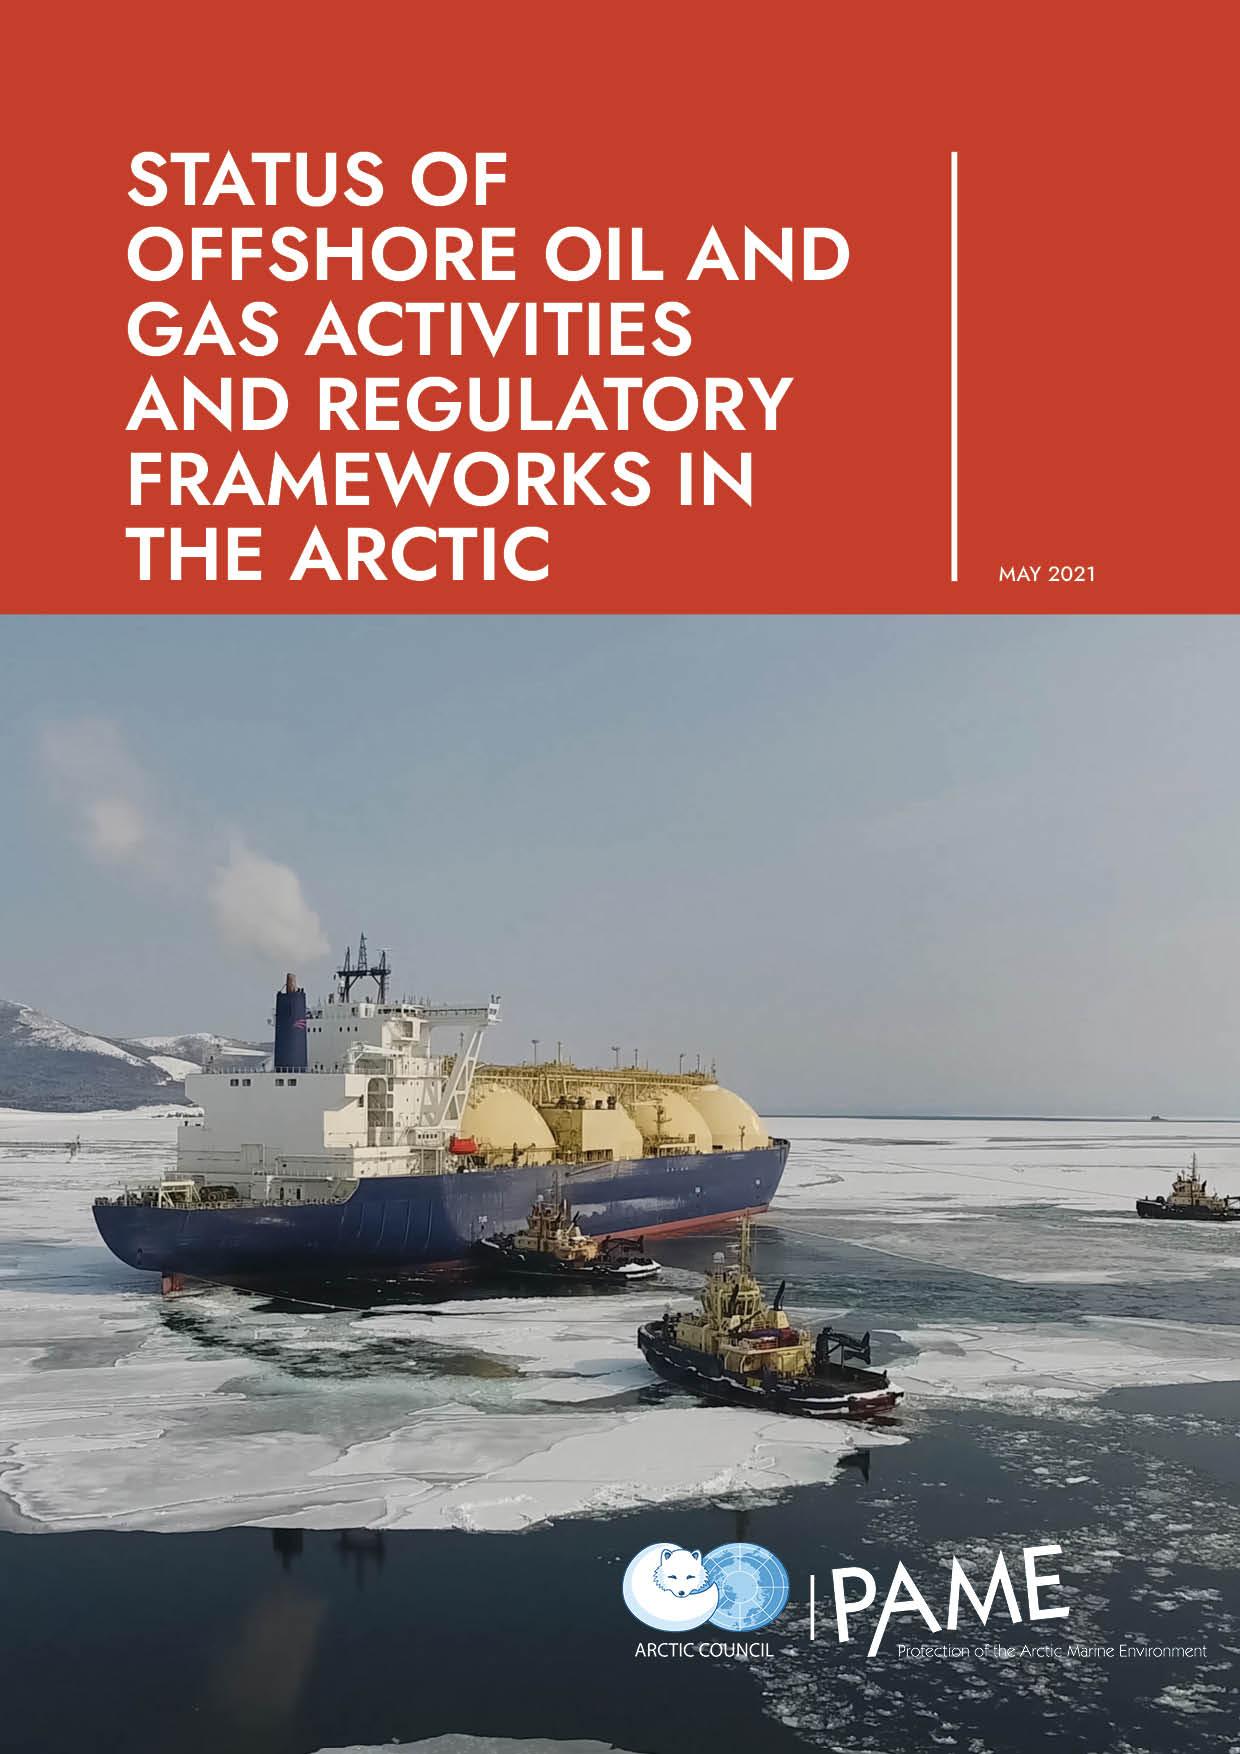 Oil and Gas cover3